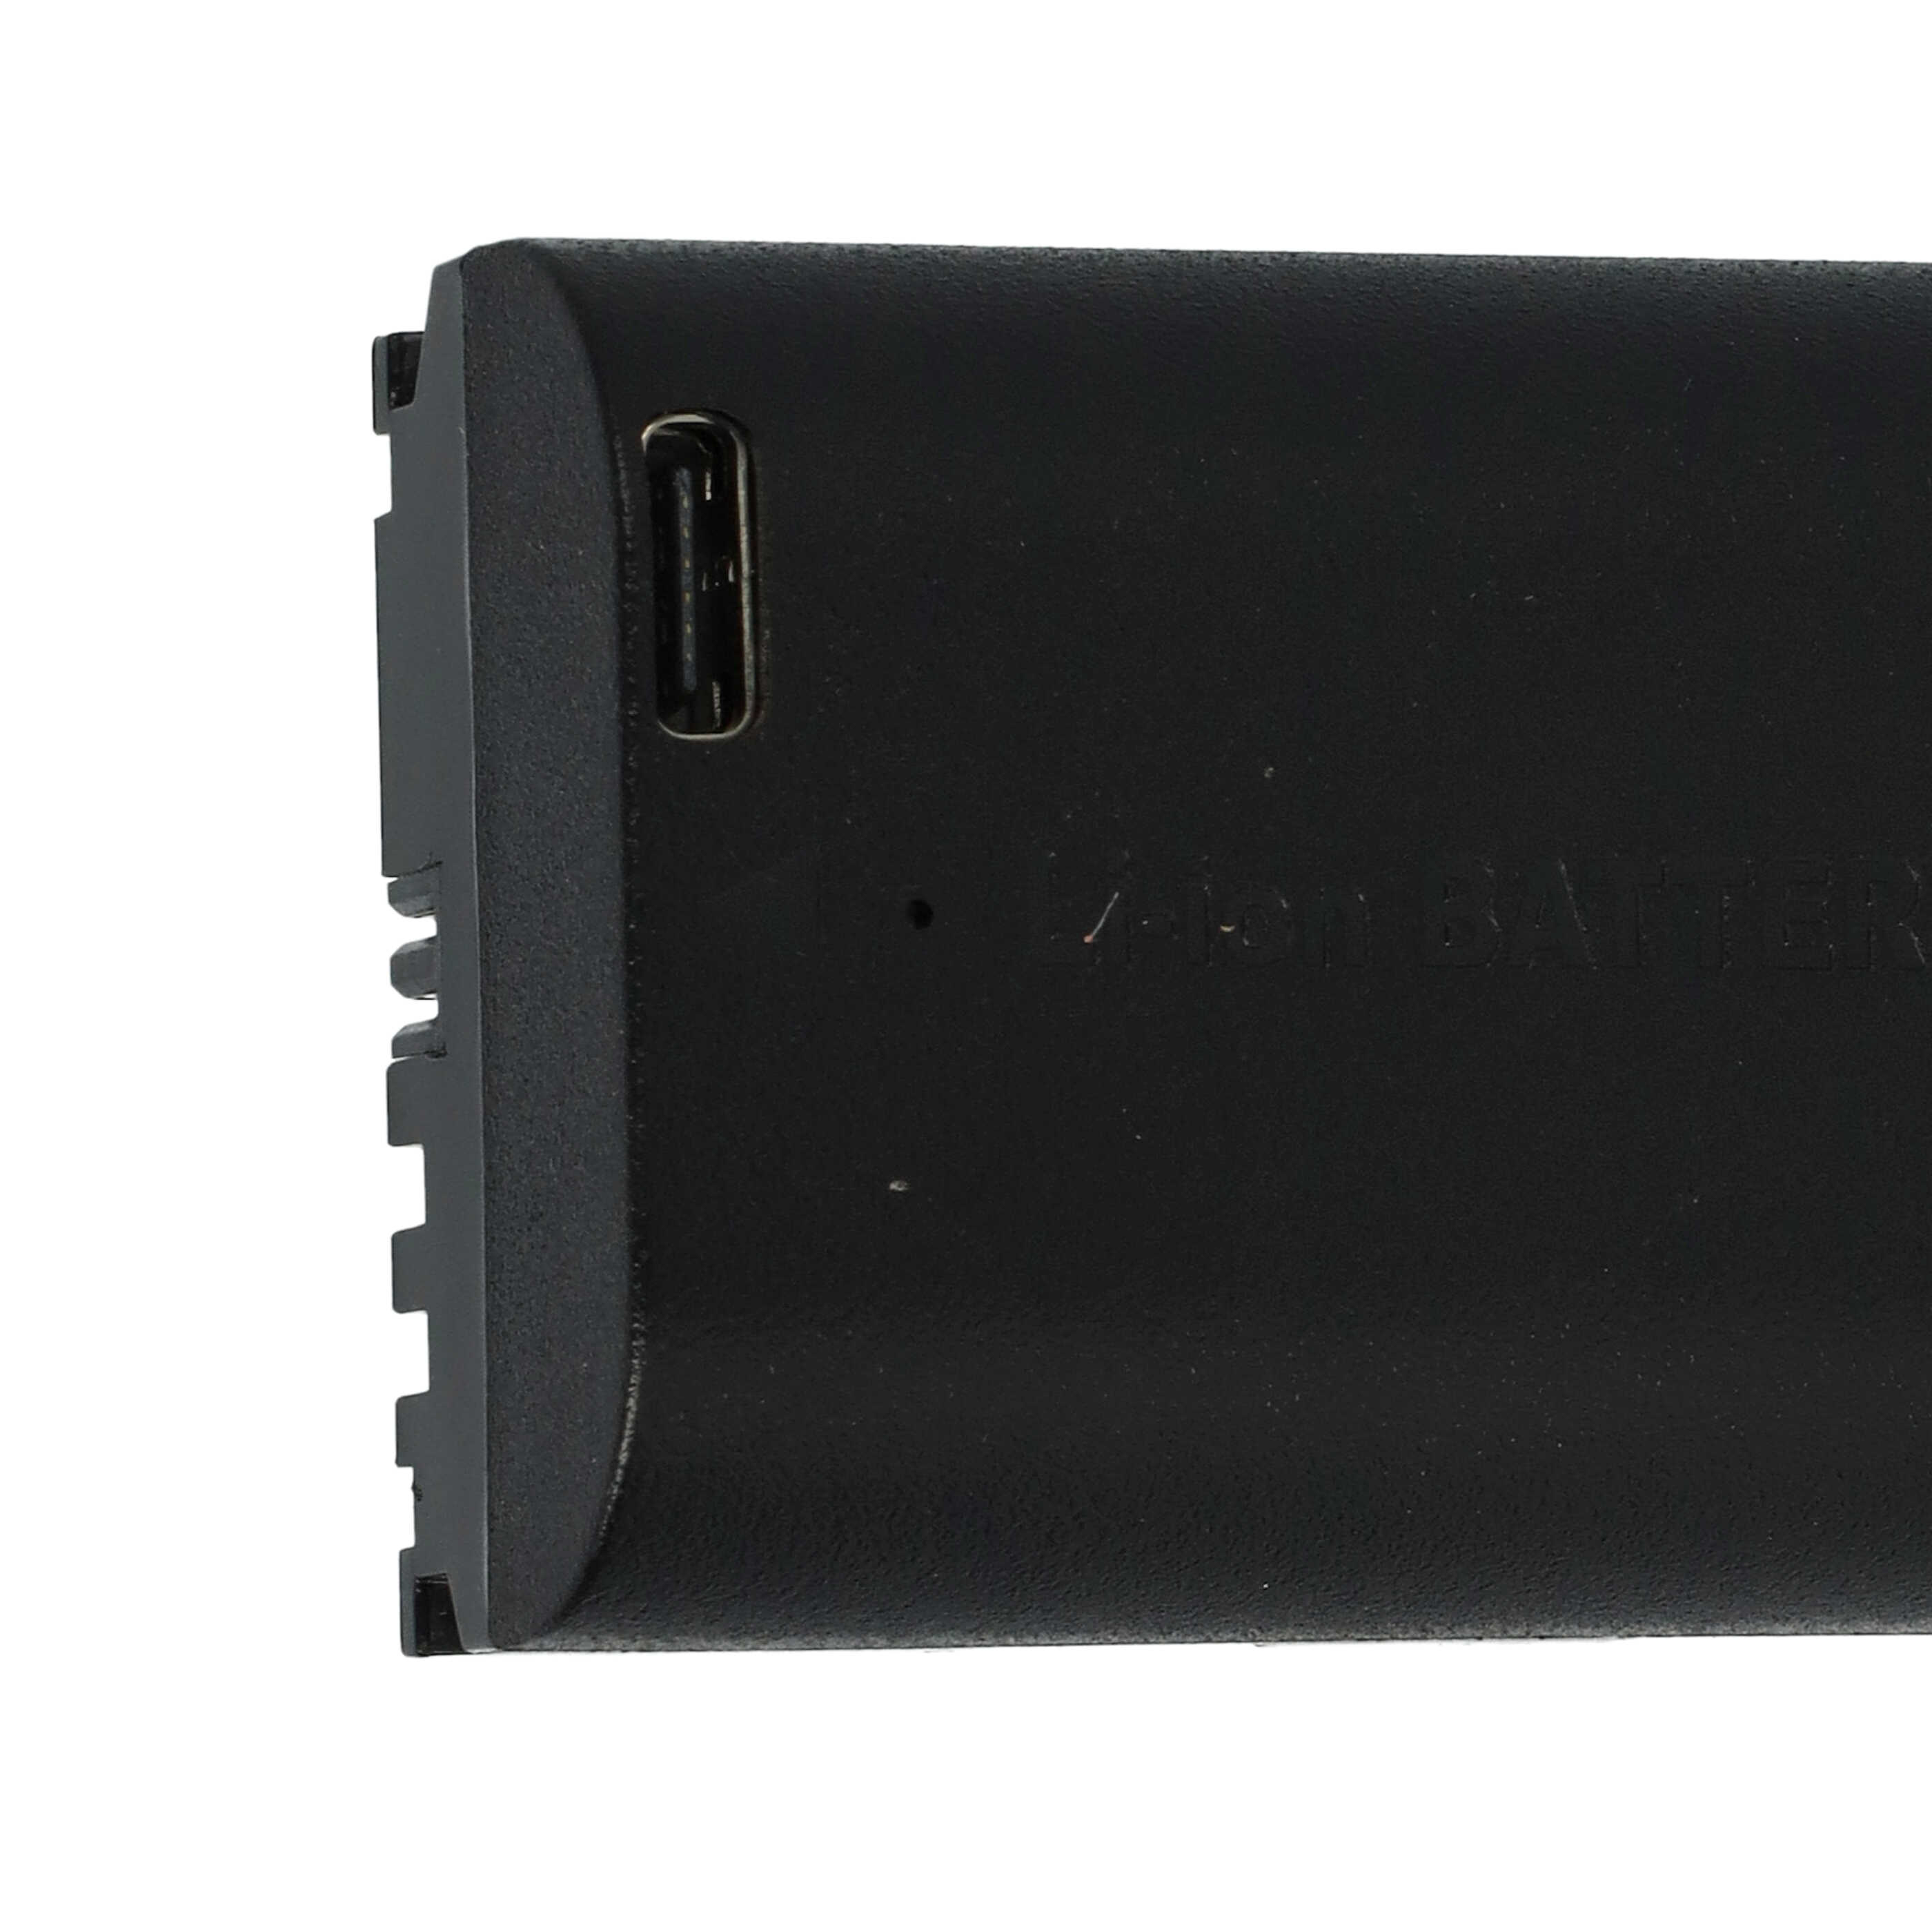 Battery Replacement for Canon LP-E6 - 1600mAh, 7.4V, Li-Ion, with USB C Socket